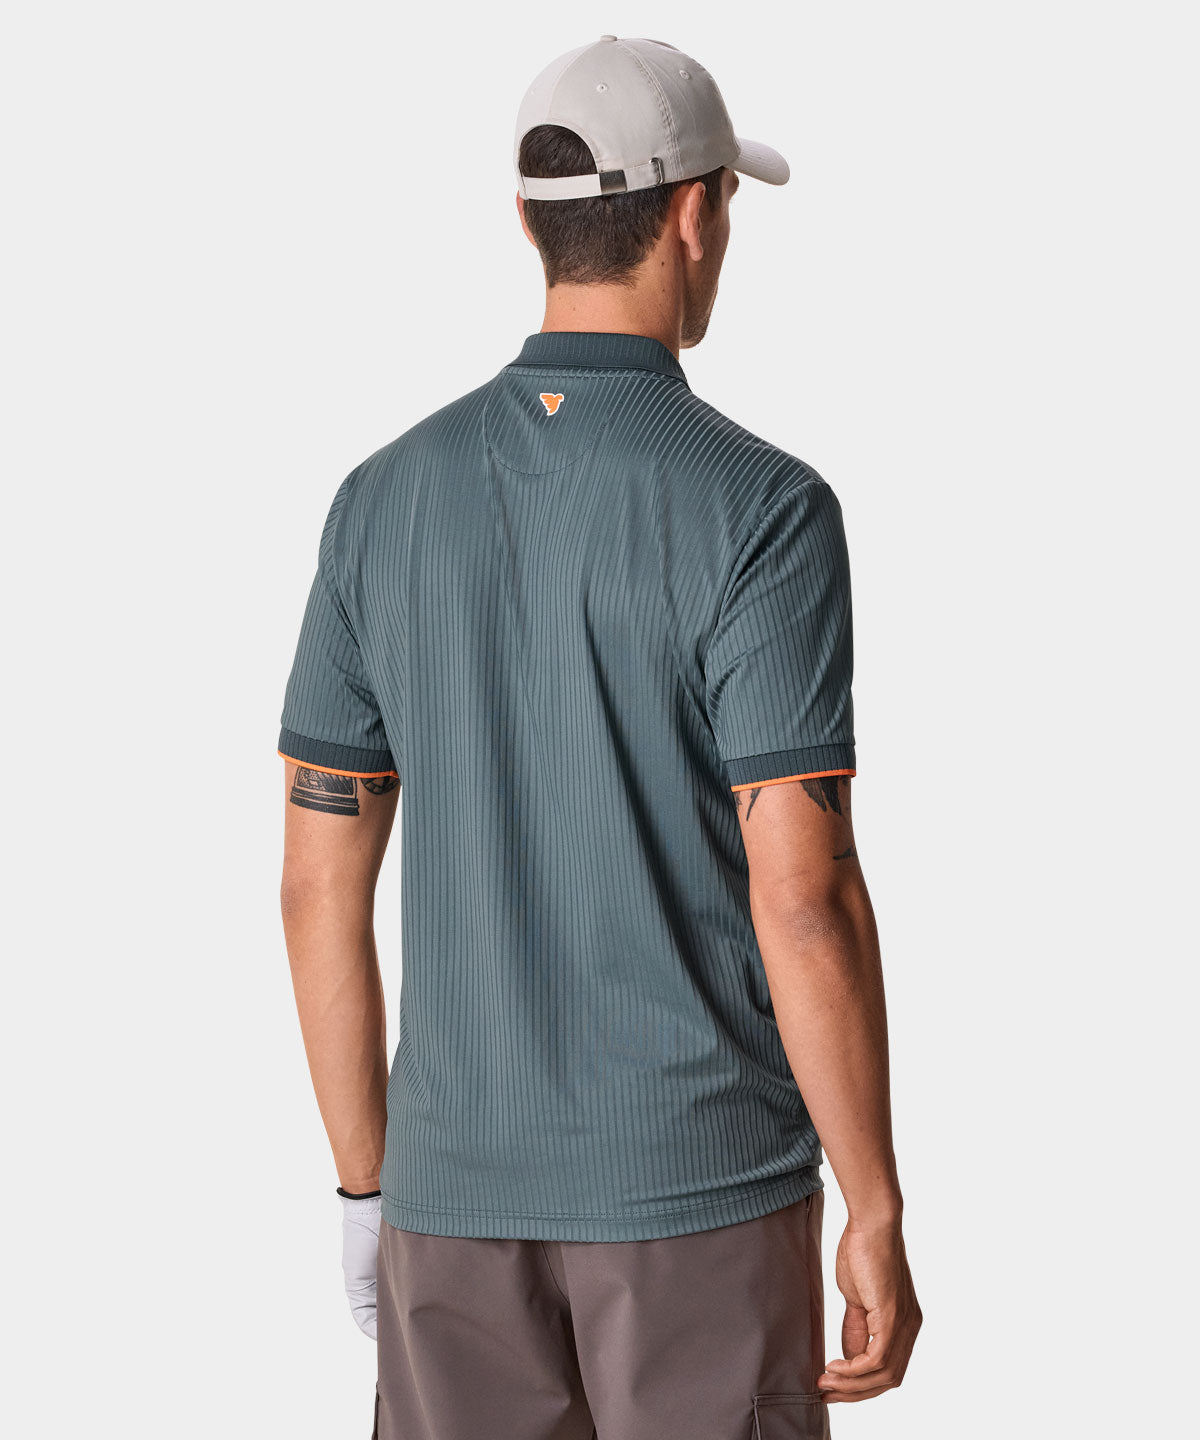 Teal Green Admiral Jersey